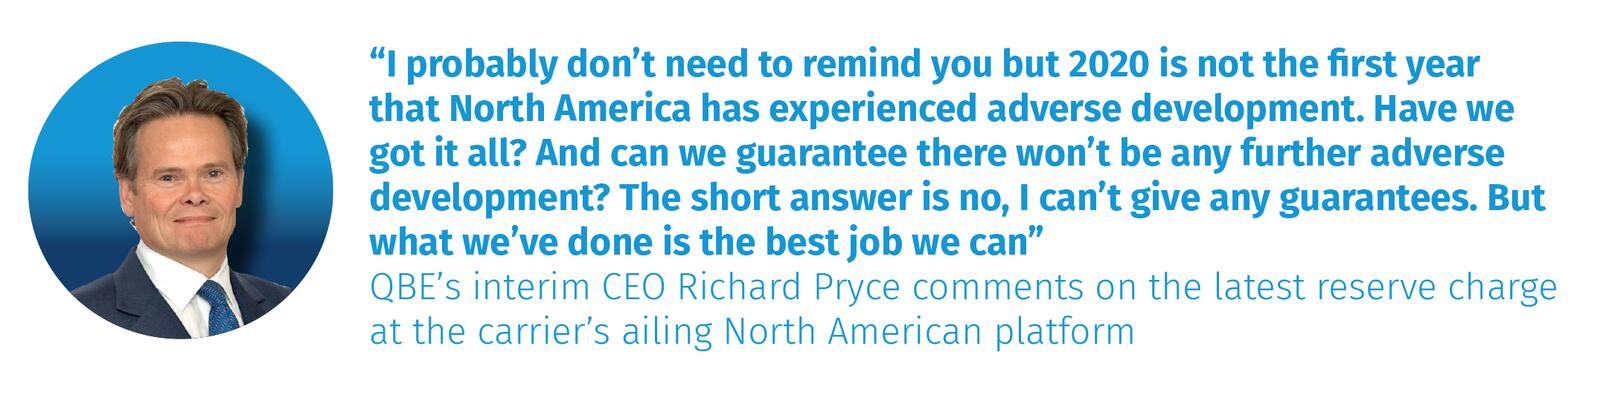 QBE’s interim CEO Richard Pryce comments on the latest reserve charge at the carrier’s ailing North American platform